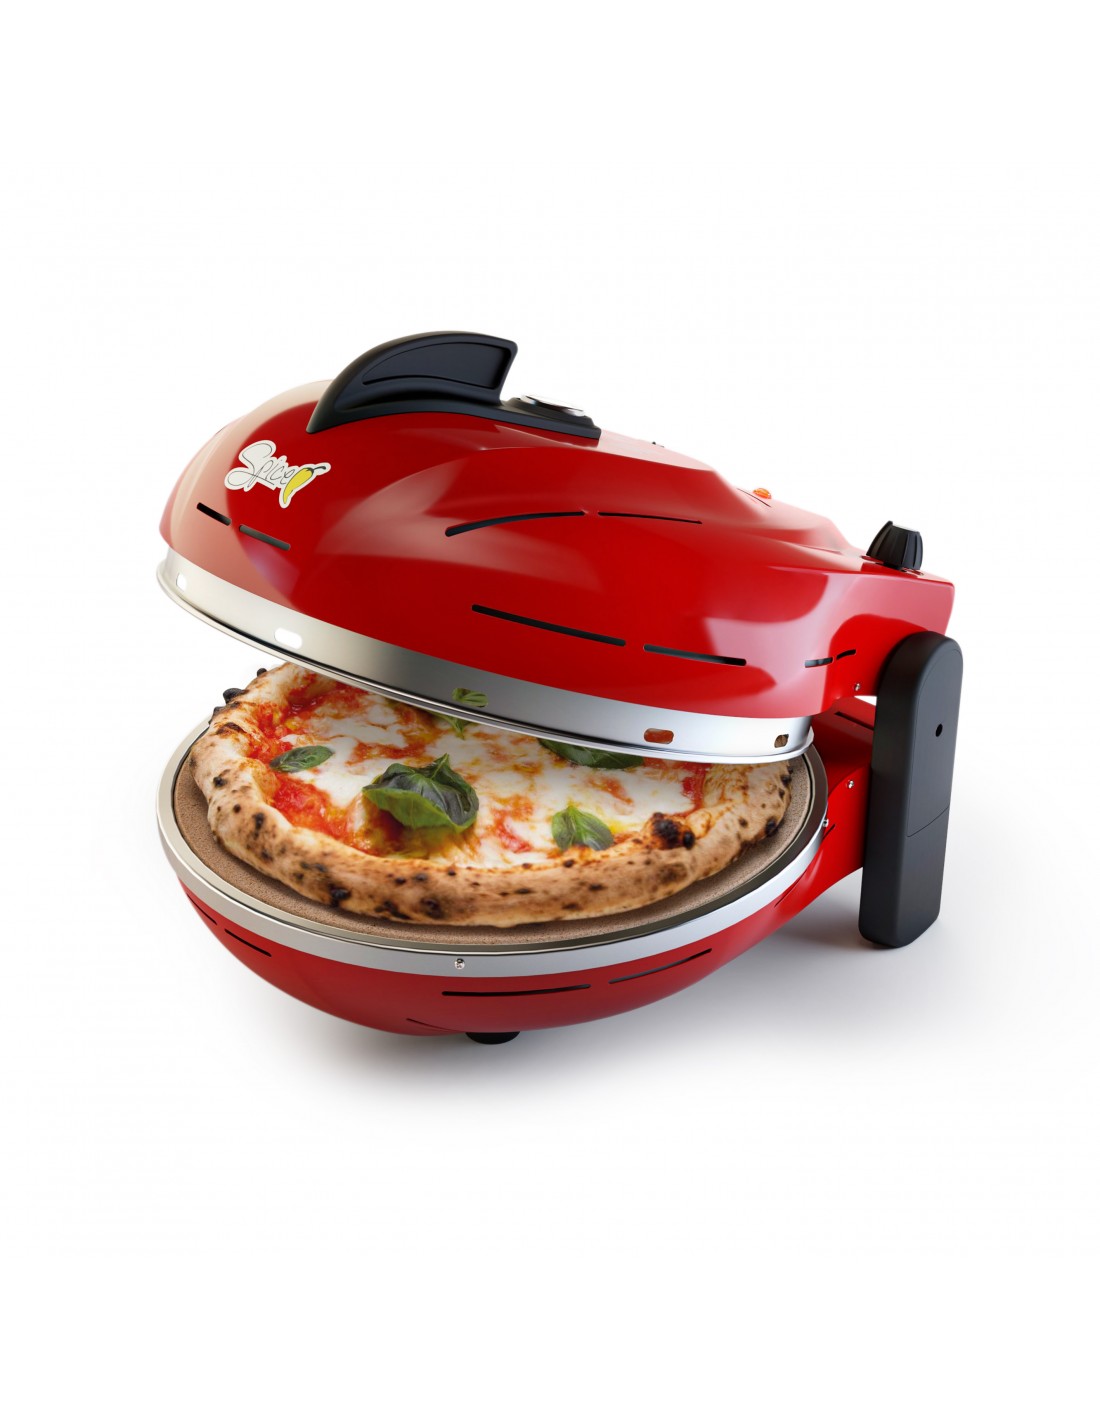 https://www.spice-electronics.com/3260-thickbox_default/spice-diavola-pro-v-20-electric-pizza-oven-100-made-in-italy-design-and-patent-red-spice.jpg